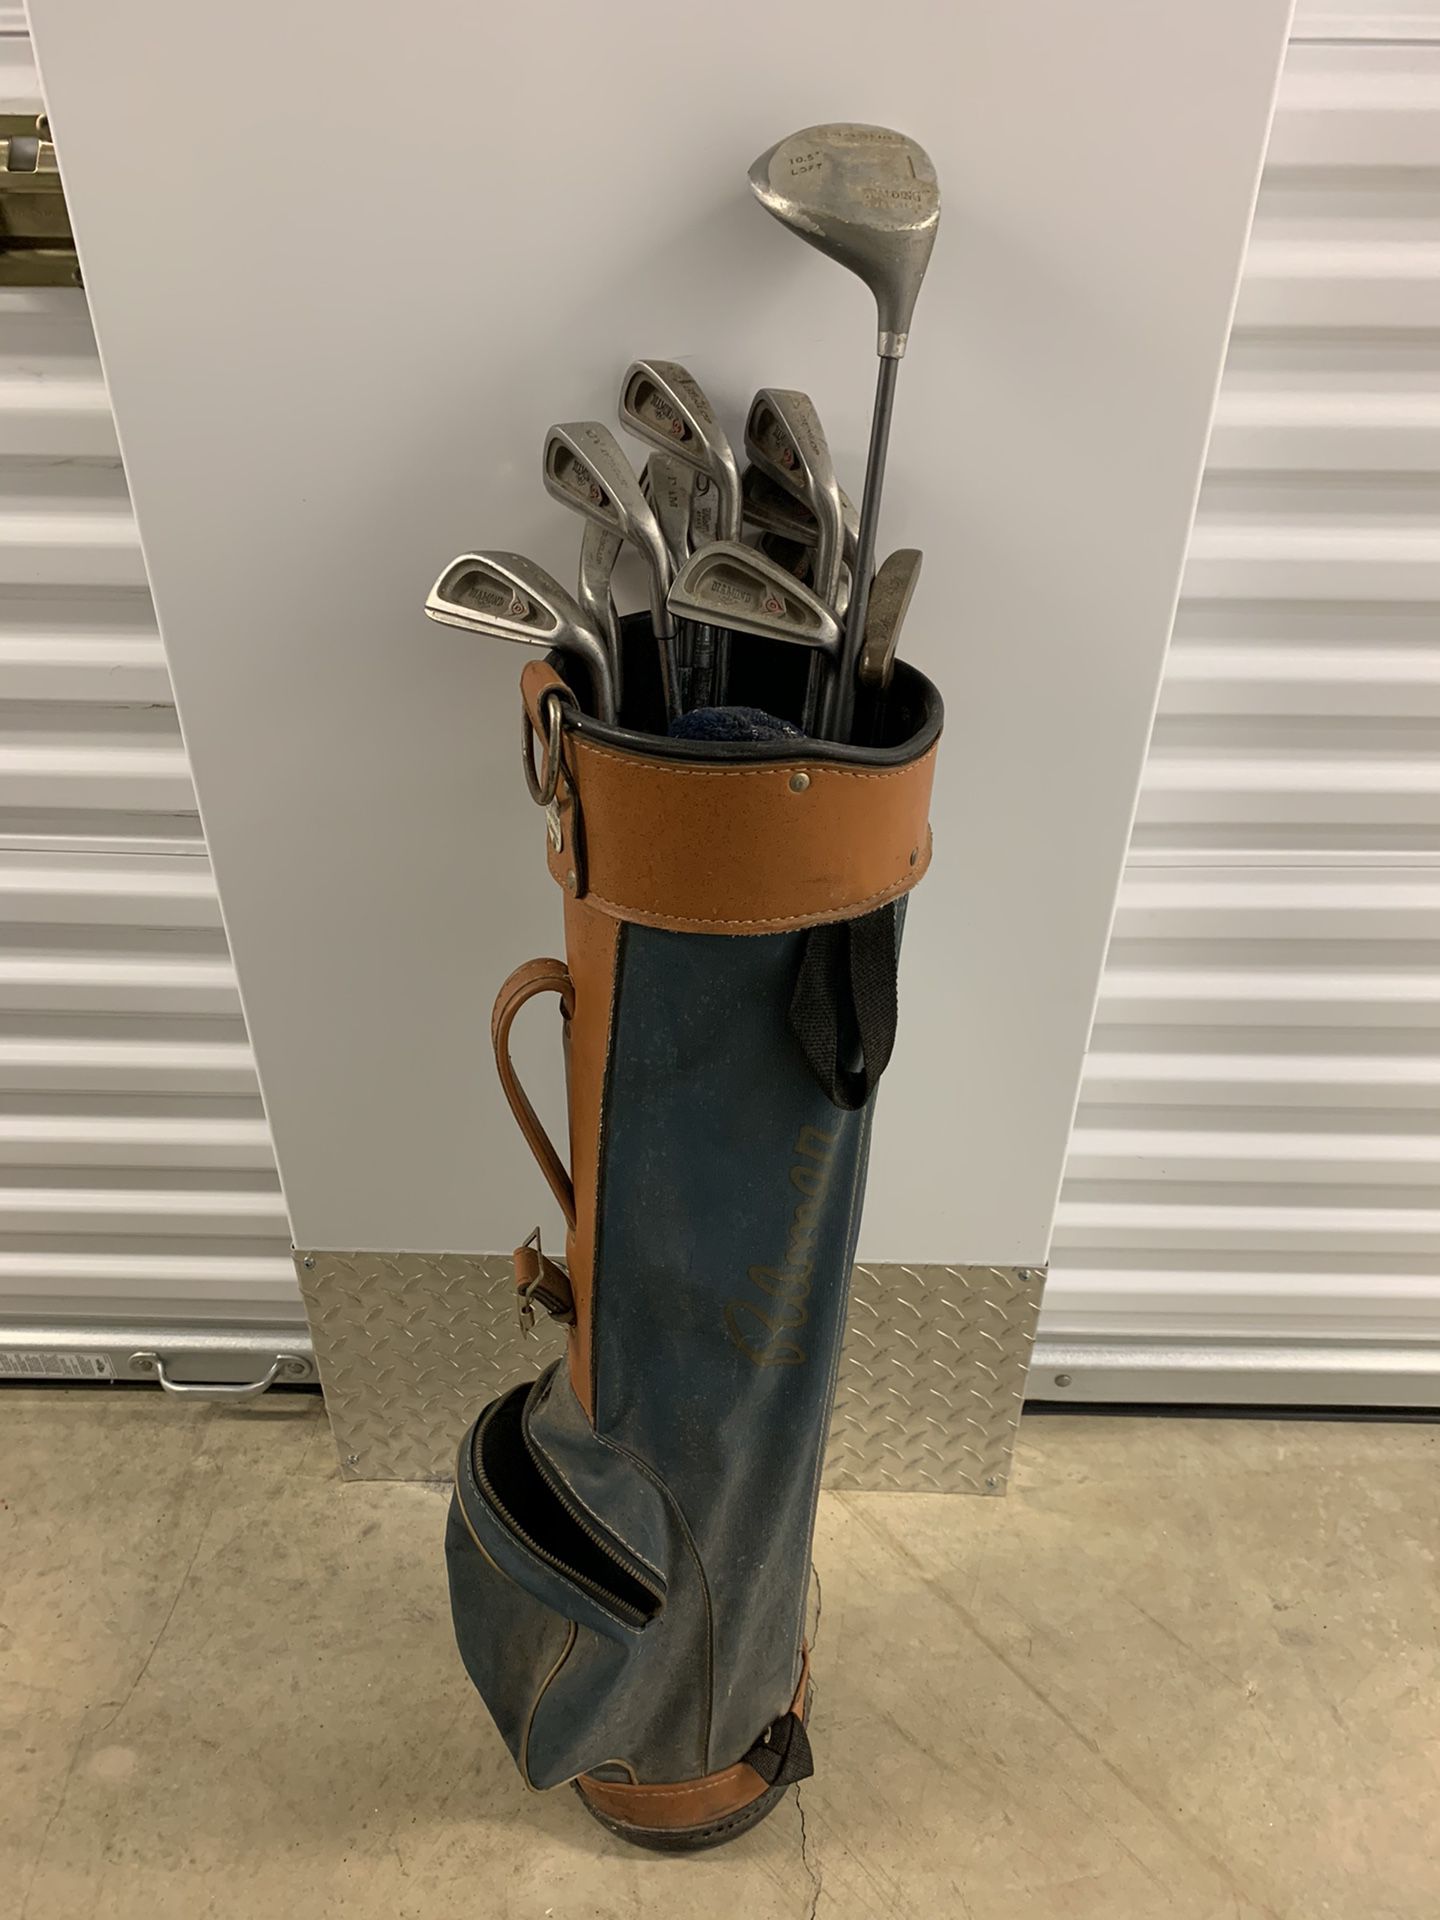 Men’s golf bag and clubs